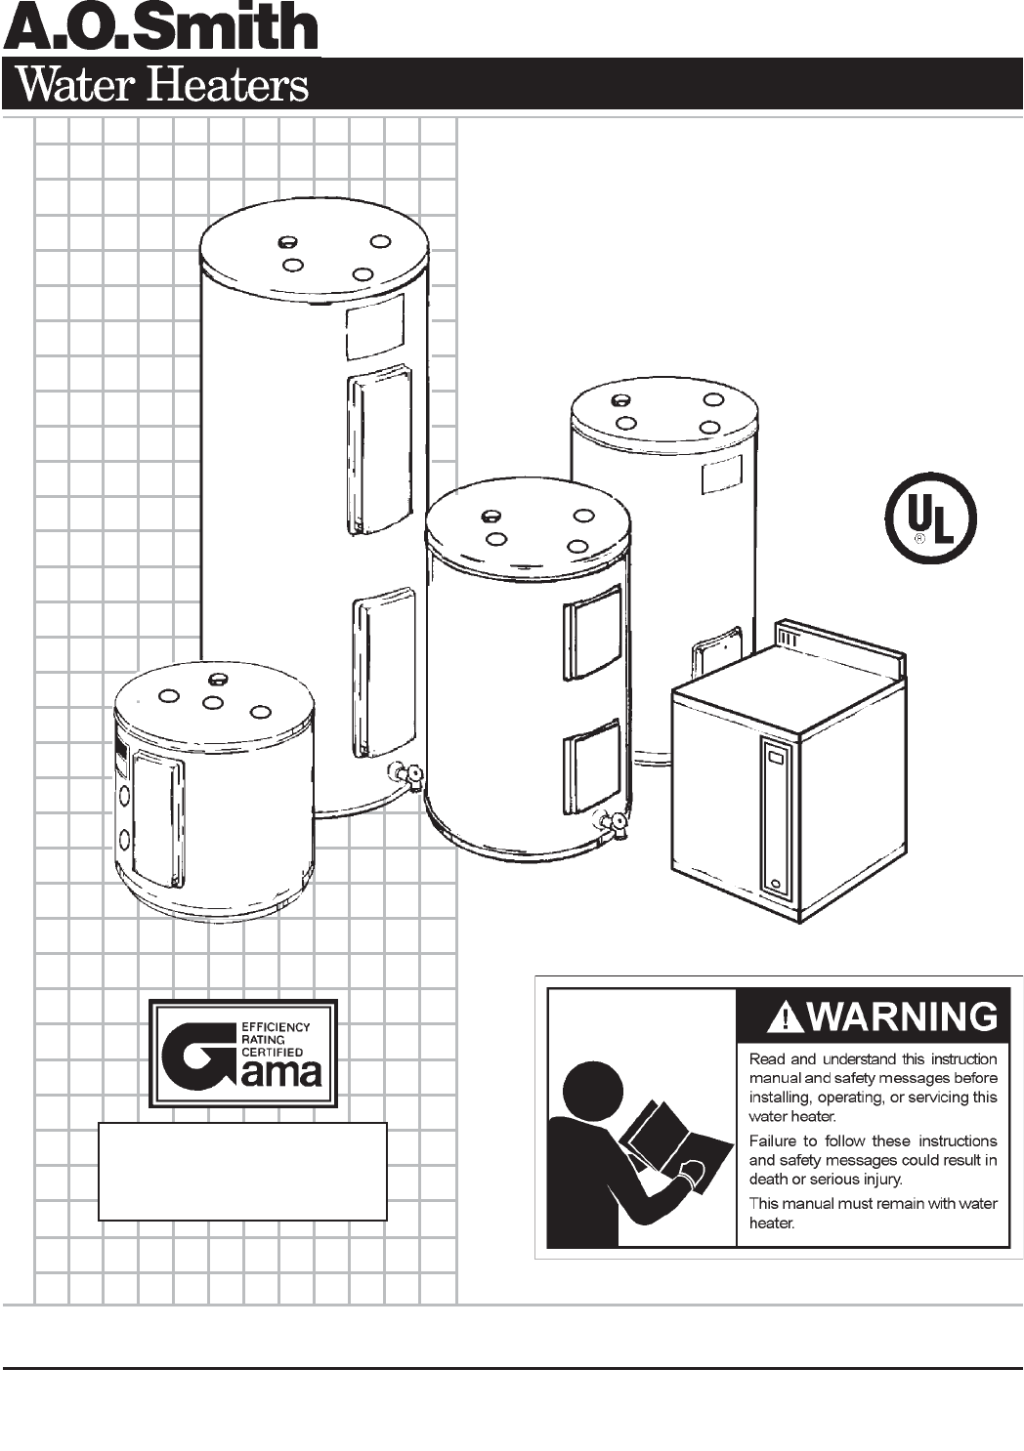 Picture of: A.O. Smith Water Heater ECS- User Guide  ManualsOnline